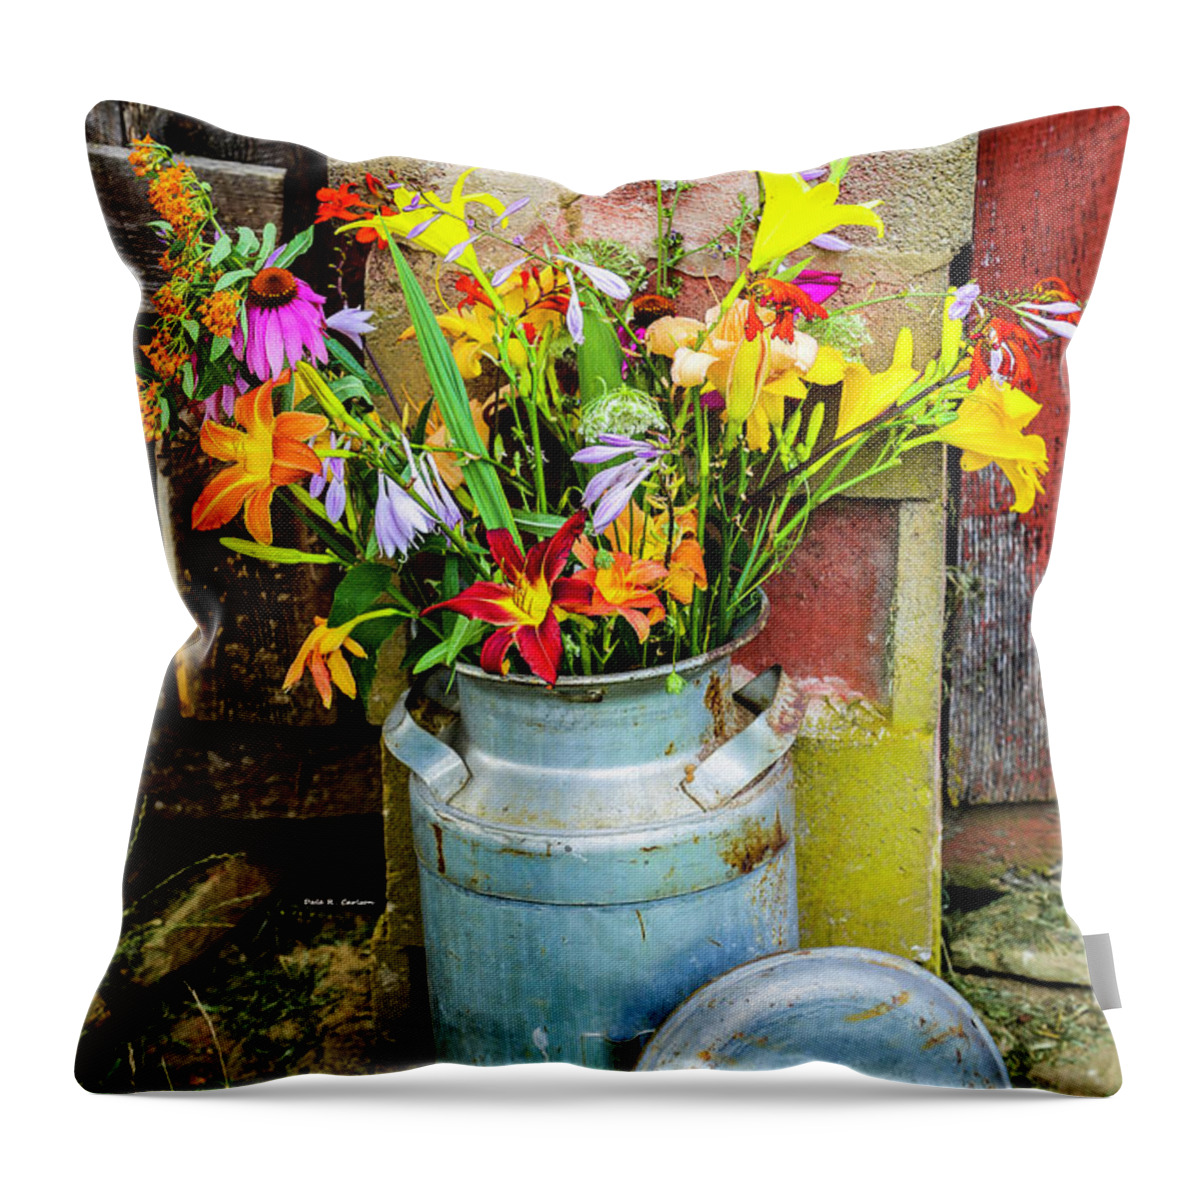 Bouquet Throw Pillow featuring the photograph Mountain Bouquet by Dale R Carlson